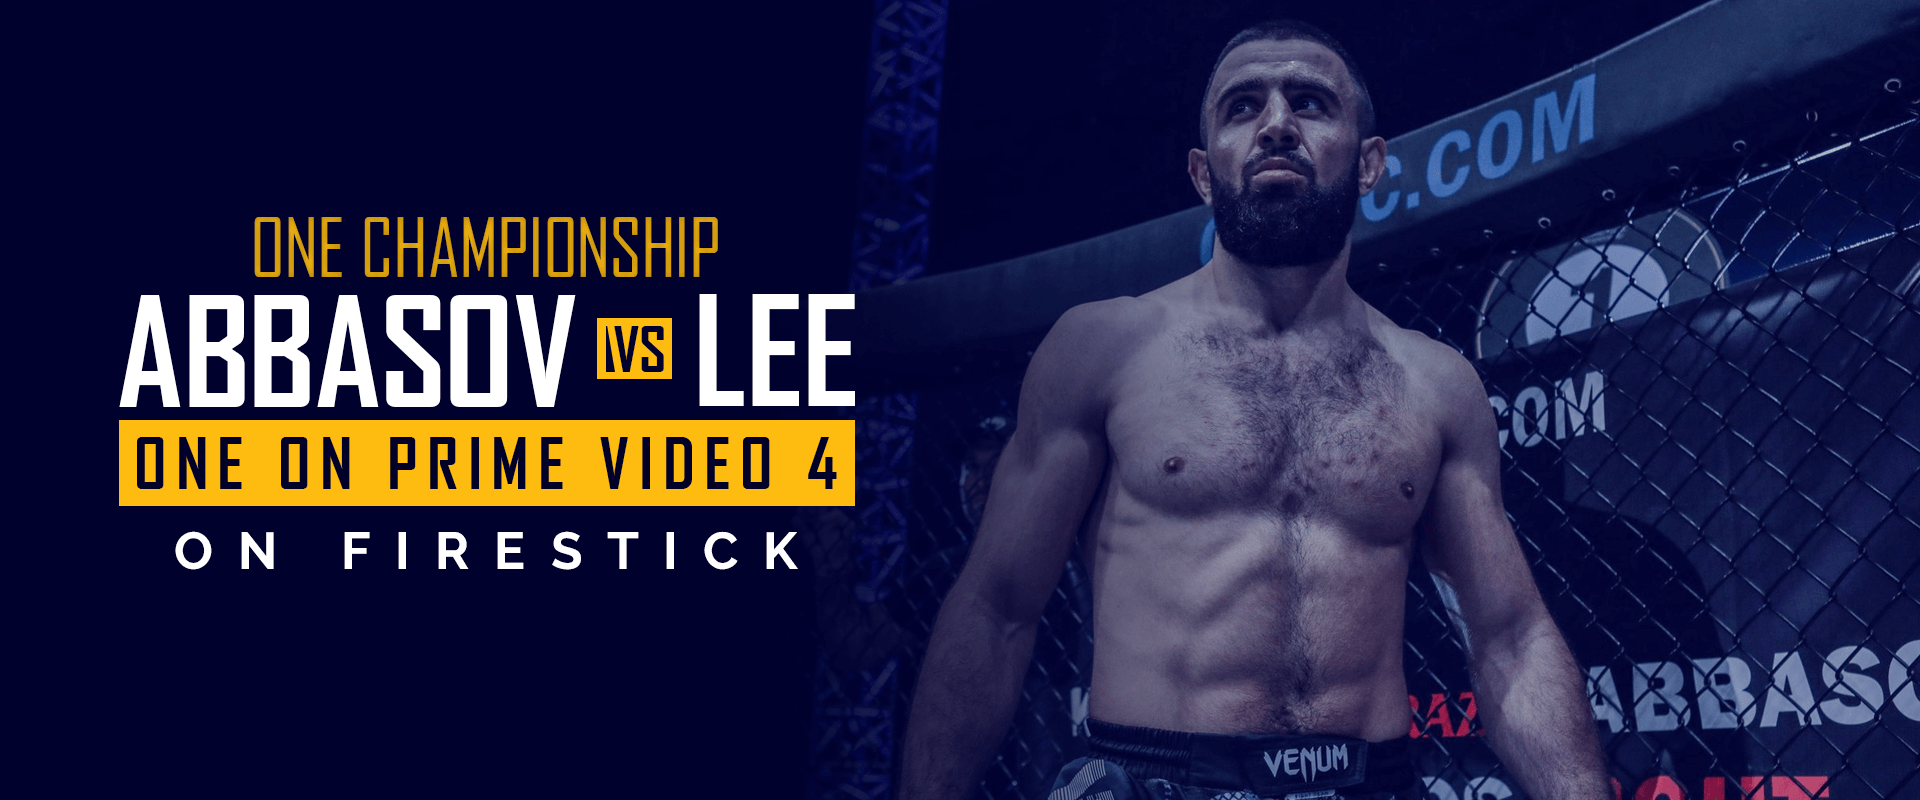 Watch One Championship on Firestick - ONE ON PRIME VIDEO 4 - ABBASOV vs LEE